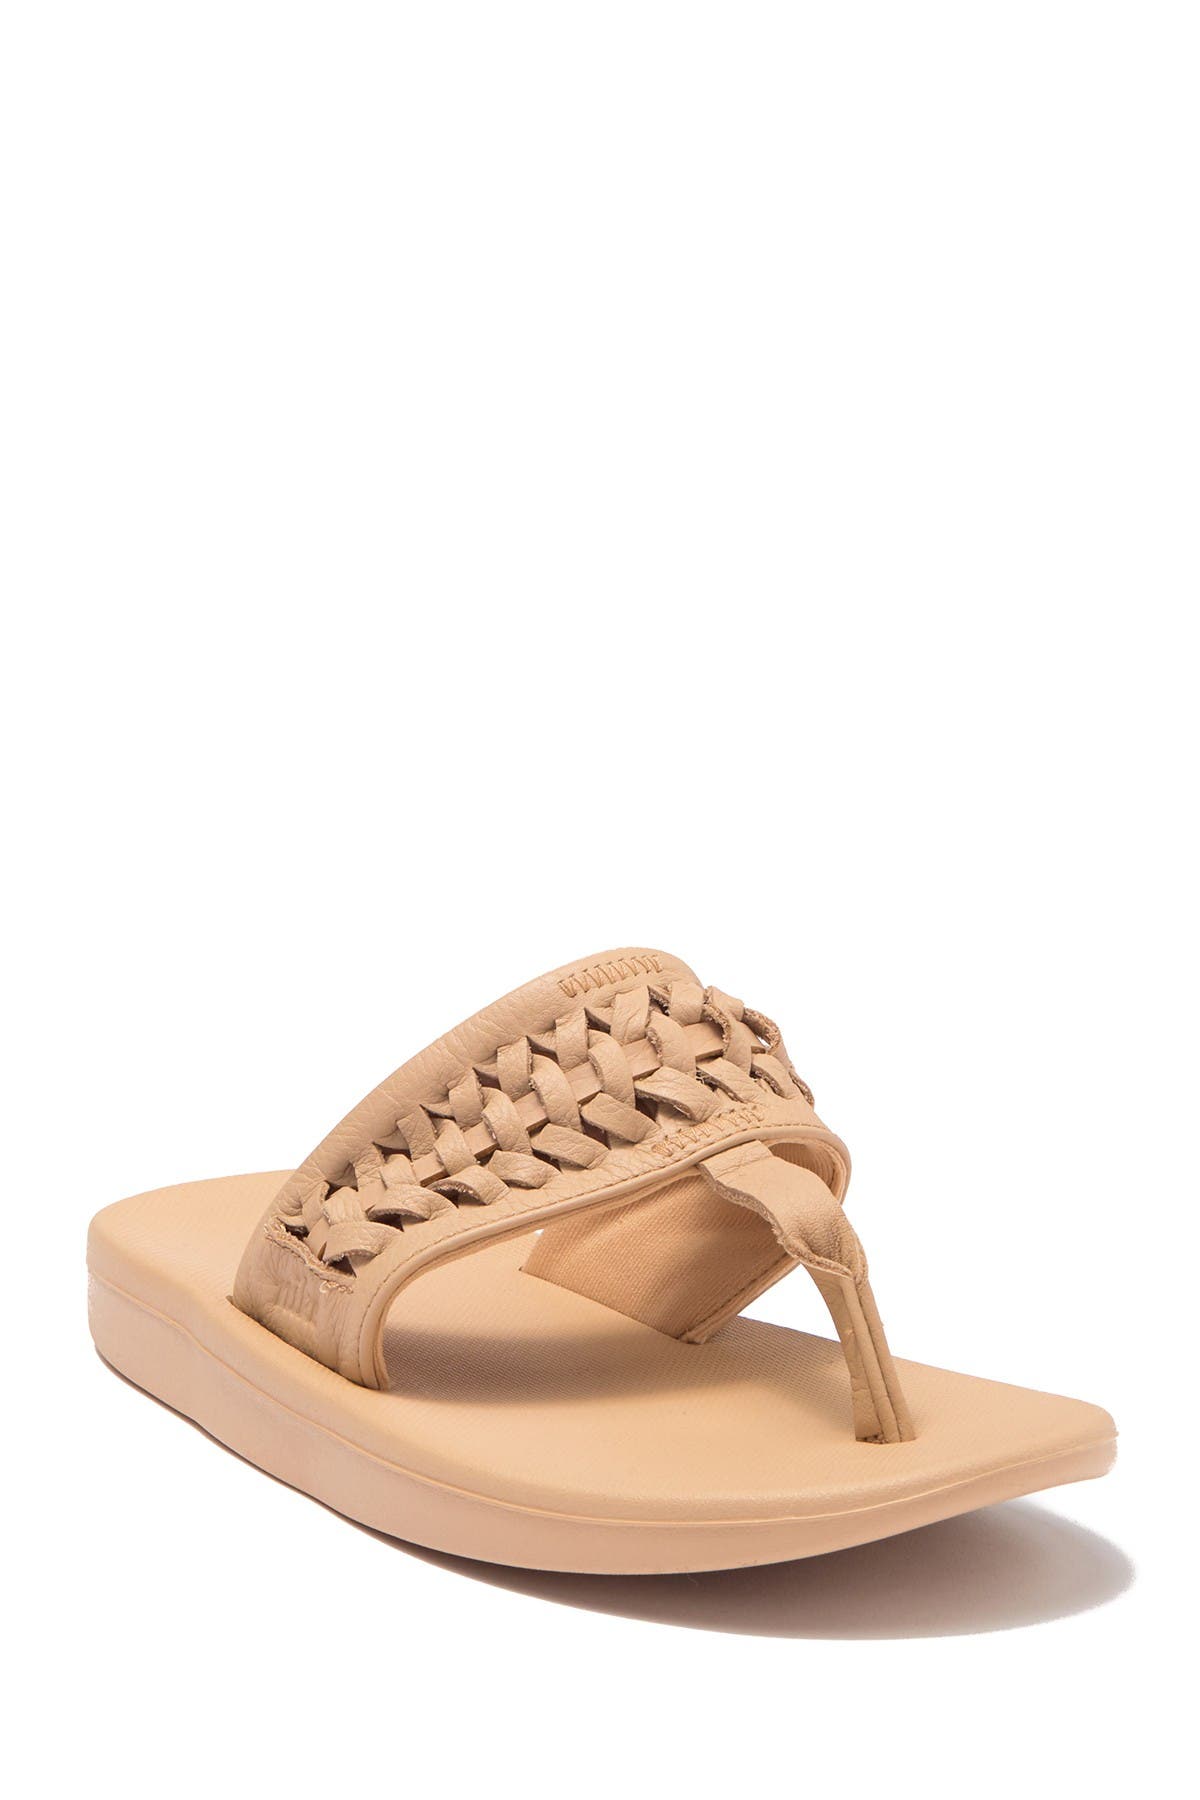 Sandals for Women Clearance | Nordstrom 